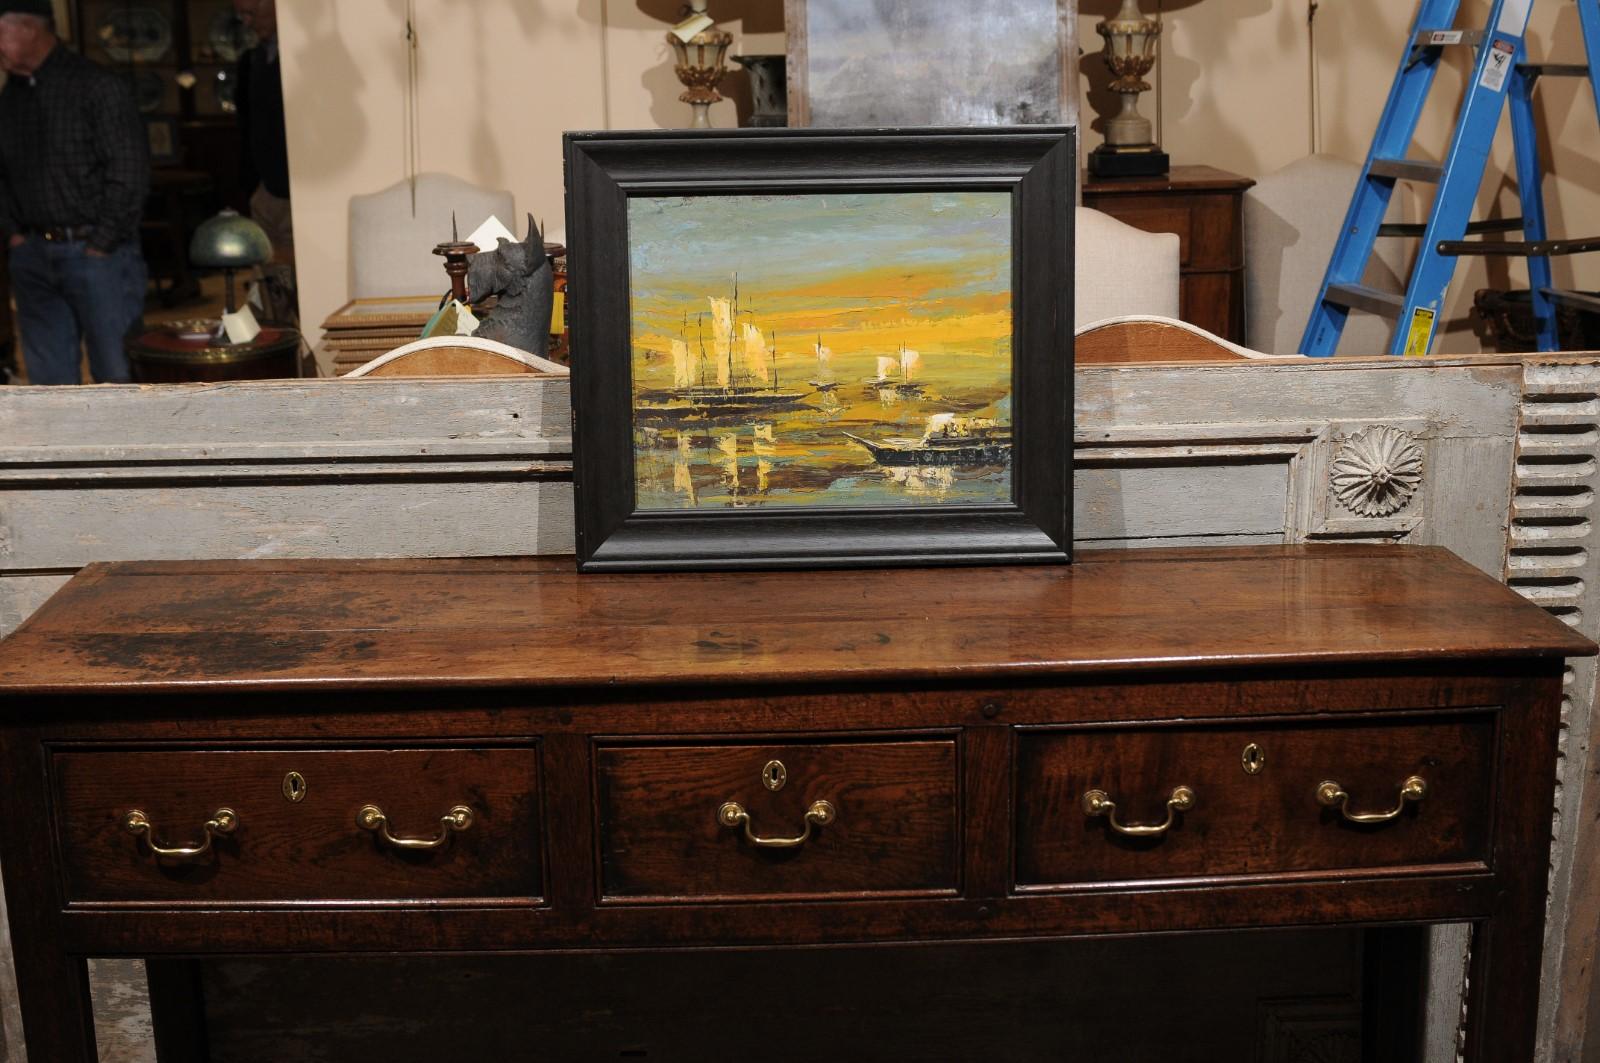 Framed 20th Century Oil on Canvas Seascape Painting with Sailboats In Good Condition For Sale In Atlanta, GA